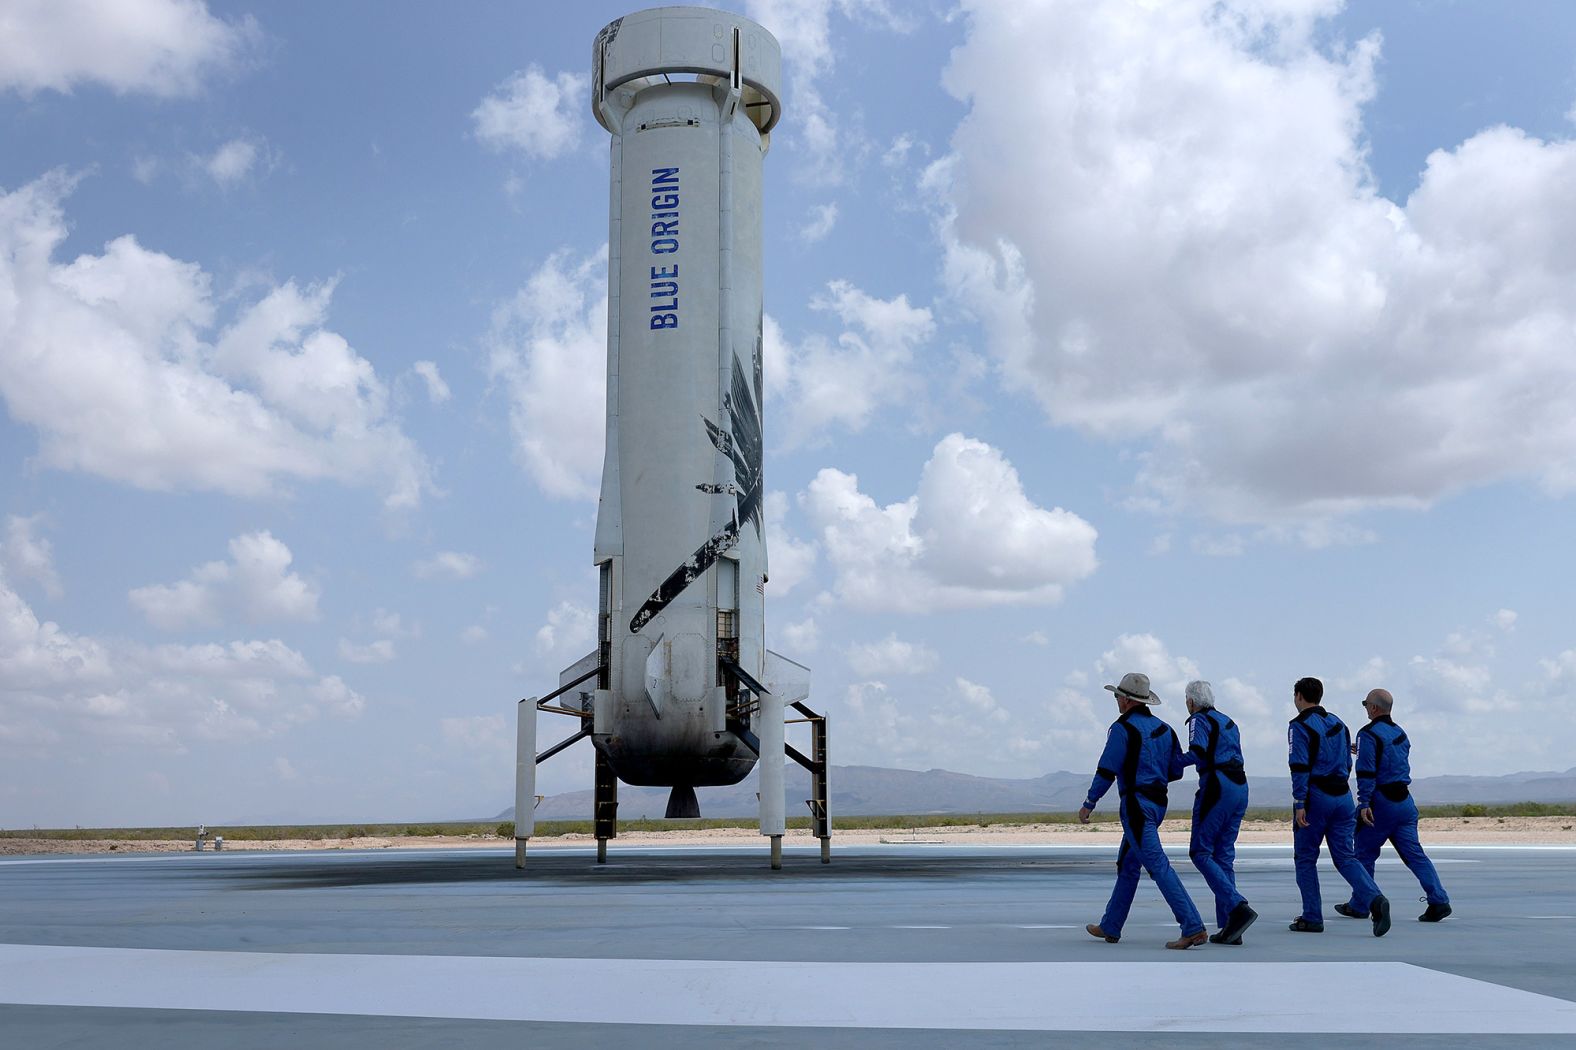 The crew walks toward the reusable rocket booster to pose for a picture after their flight. The booster launched the capsule and then returned to the ground and landed upright.